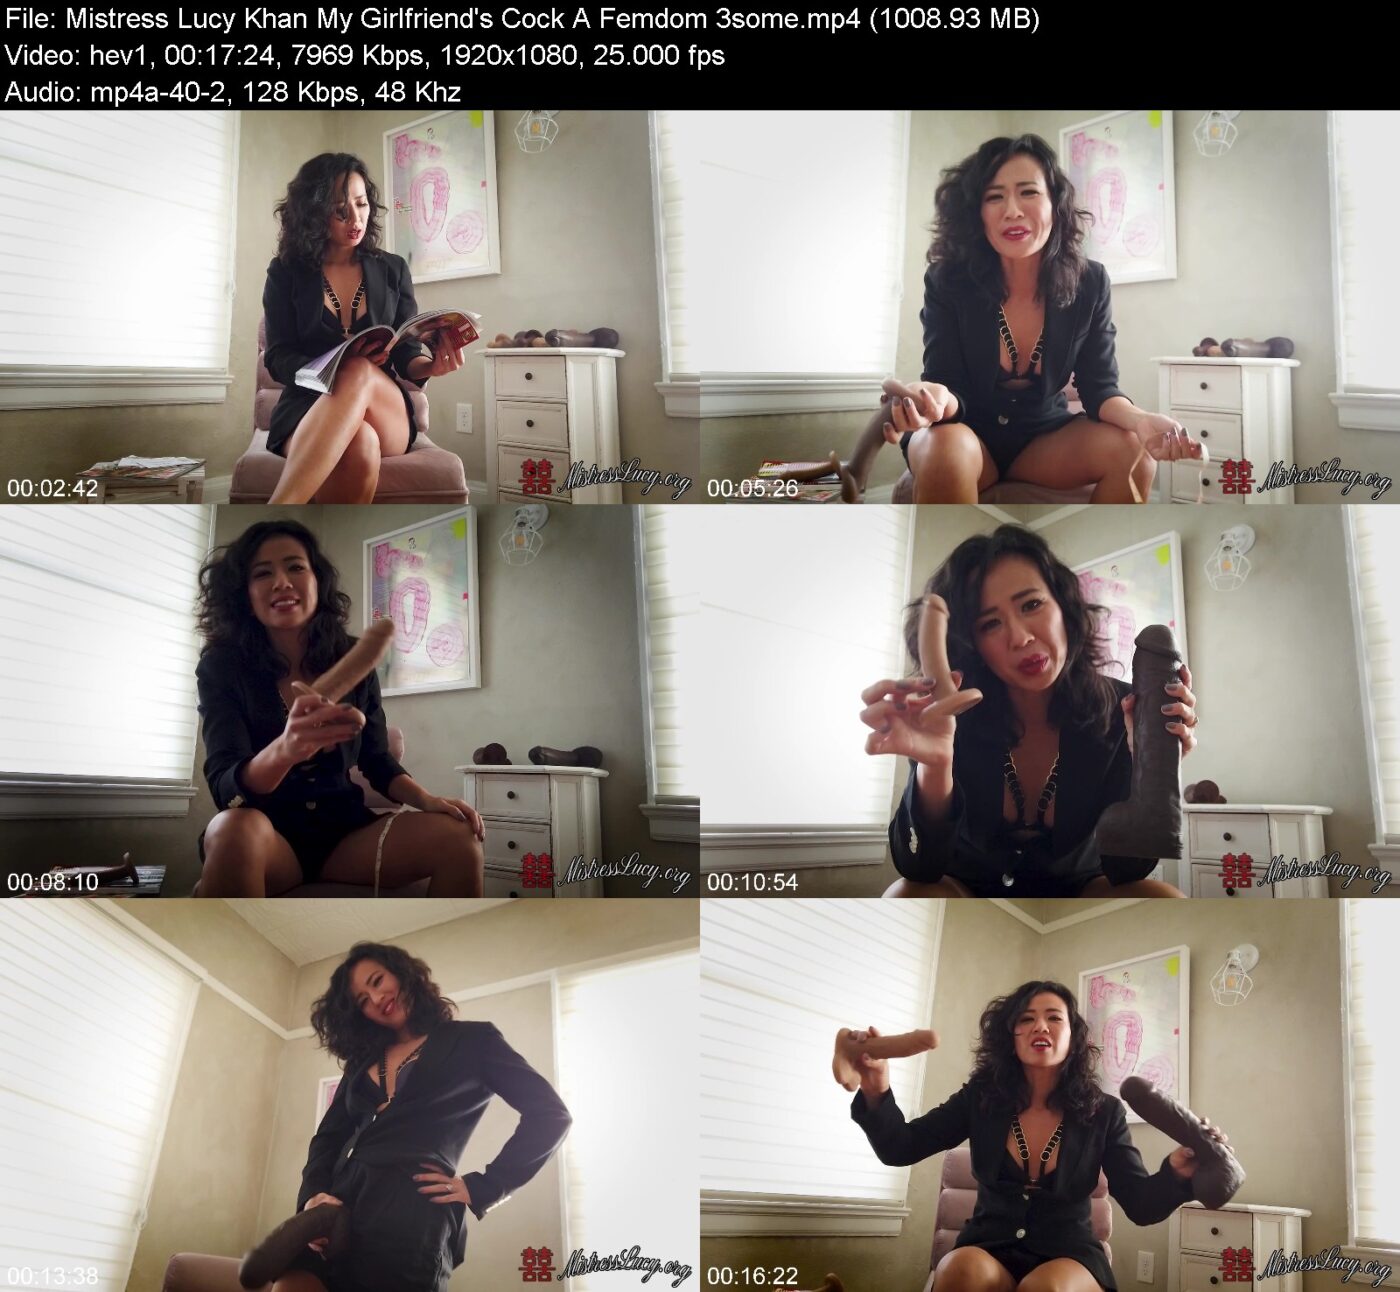 Actress: Mistress Lucy Khan. Title and Studio: My Girlfriend’s Cock A Femdom 3some